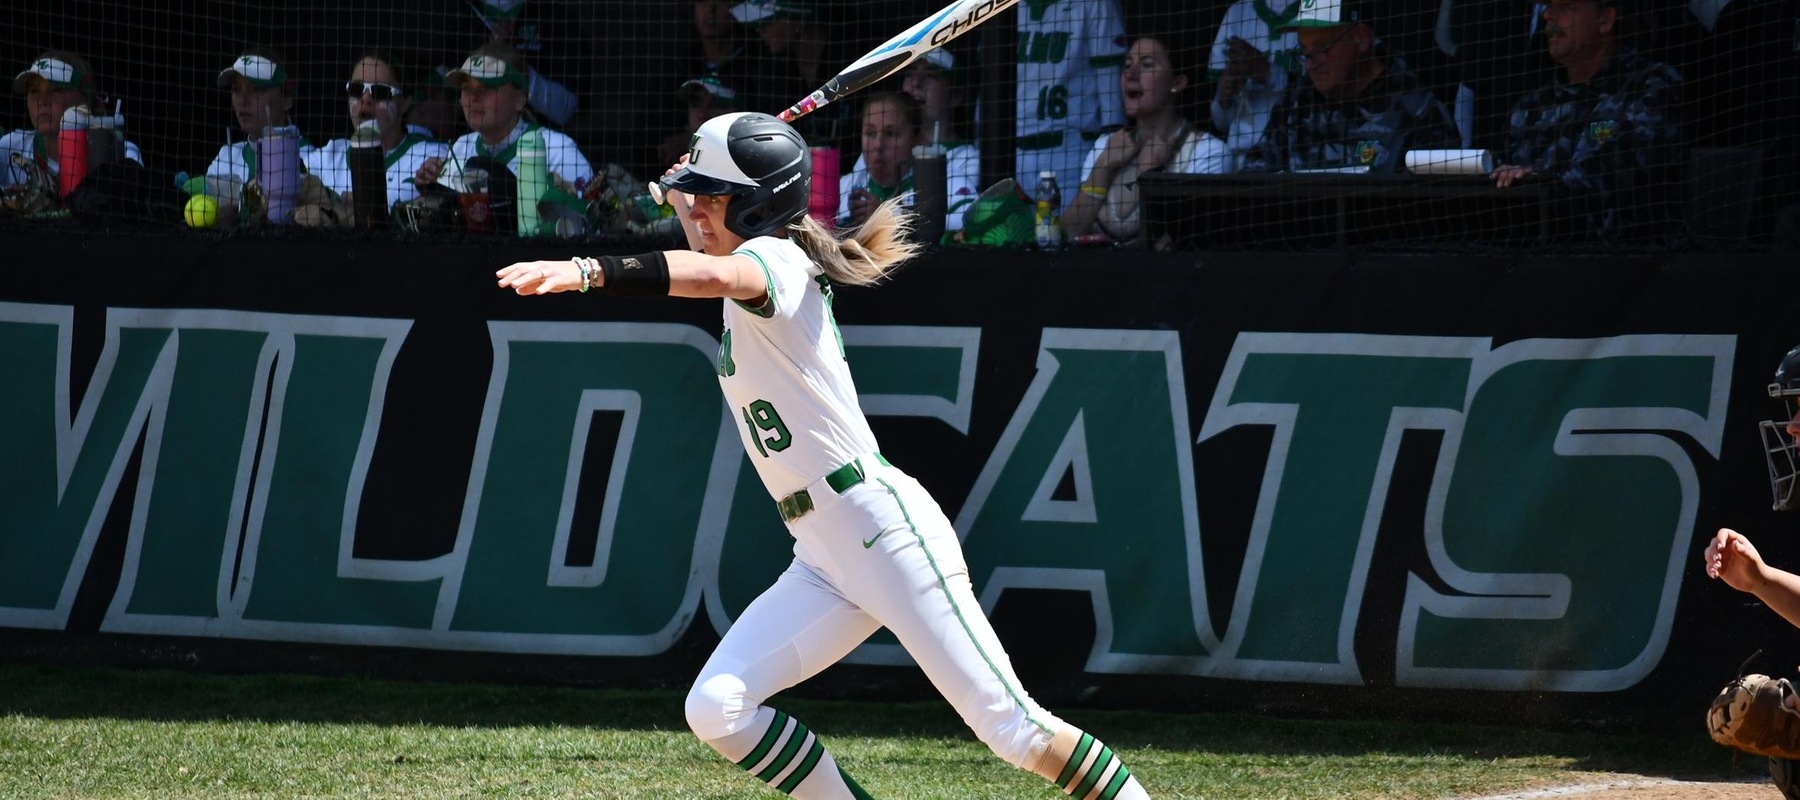 File photo of Taylor Gillis who went 4-for-6 with three doubles, 5 RBI, and 3 runs scored at Goldey-Beacom. Copyright 2024; Wilmington University. All rights reserved. Photo by Alea Javorowsky. April 7, 2024 vs. Molloy.